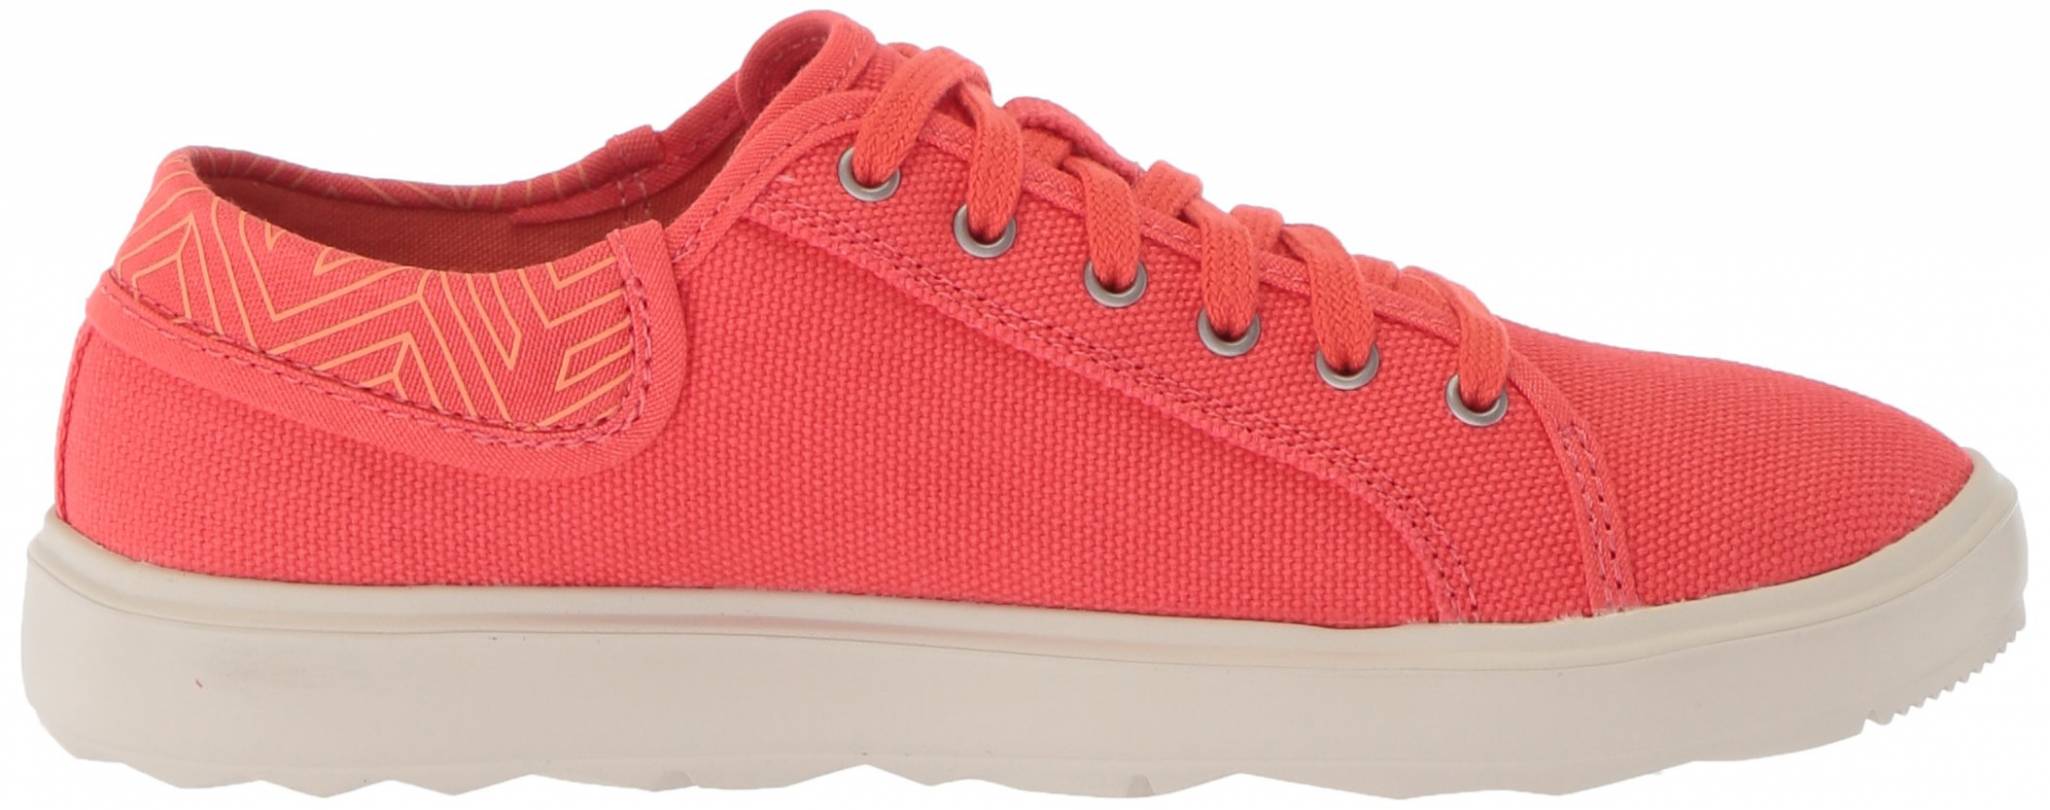 Merrell Around Town City Lace Canvas 